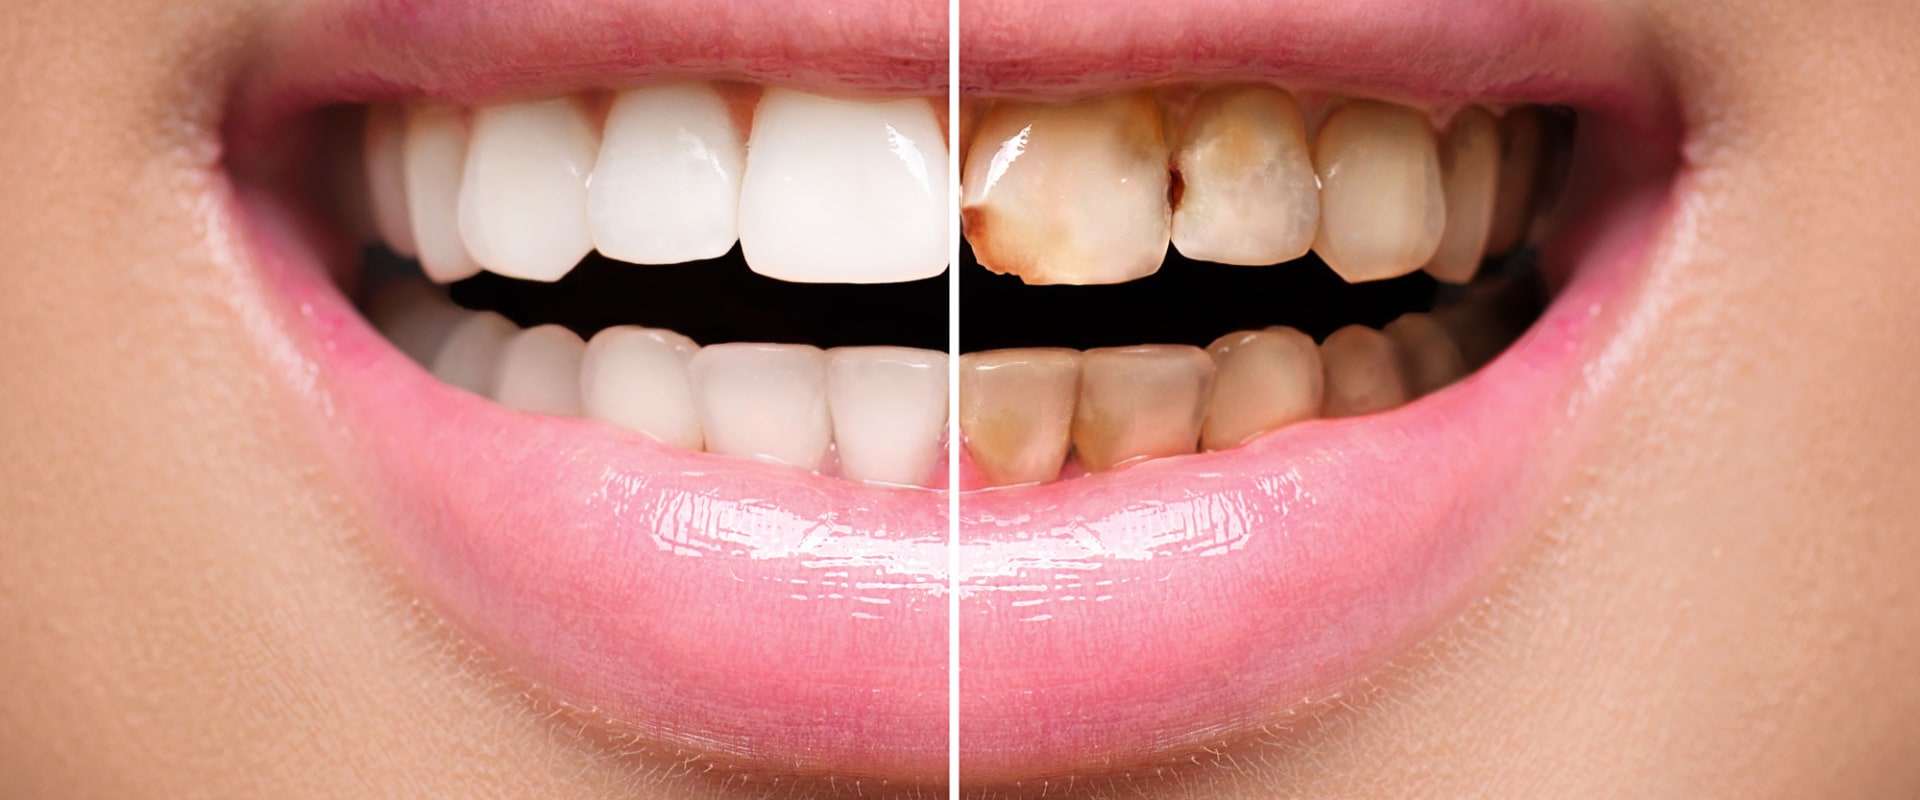 Everything You Need To Know Before Opting For A Dental Veneer Treatment In Kota Kinabalu